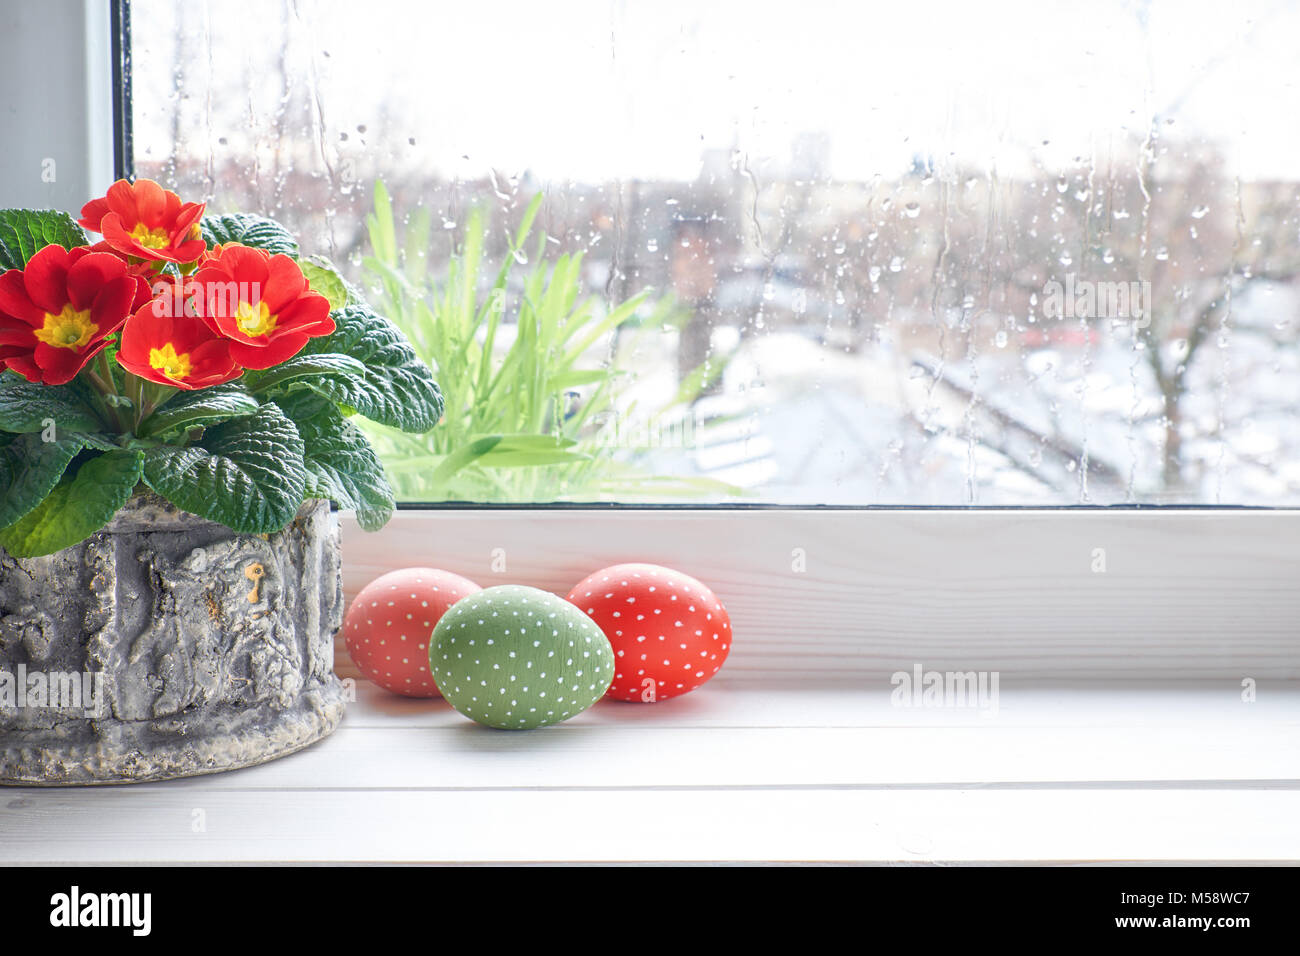 Spring background with red primrose flowers in pot and Easter eggs on the window with raindrops. Space for your text. Stock Photo